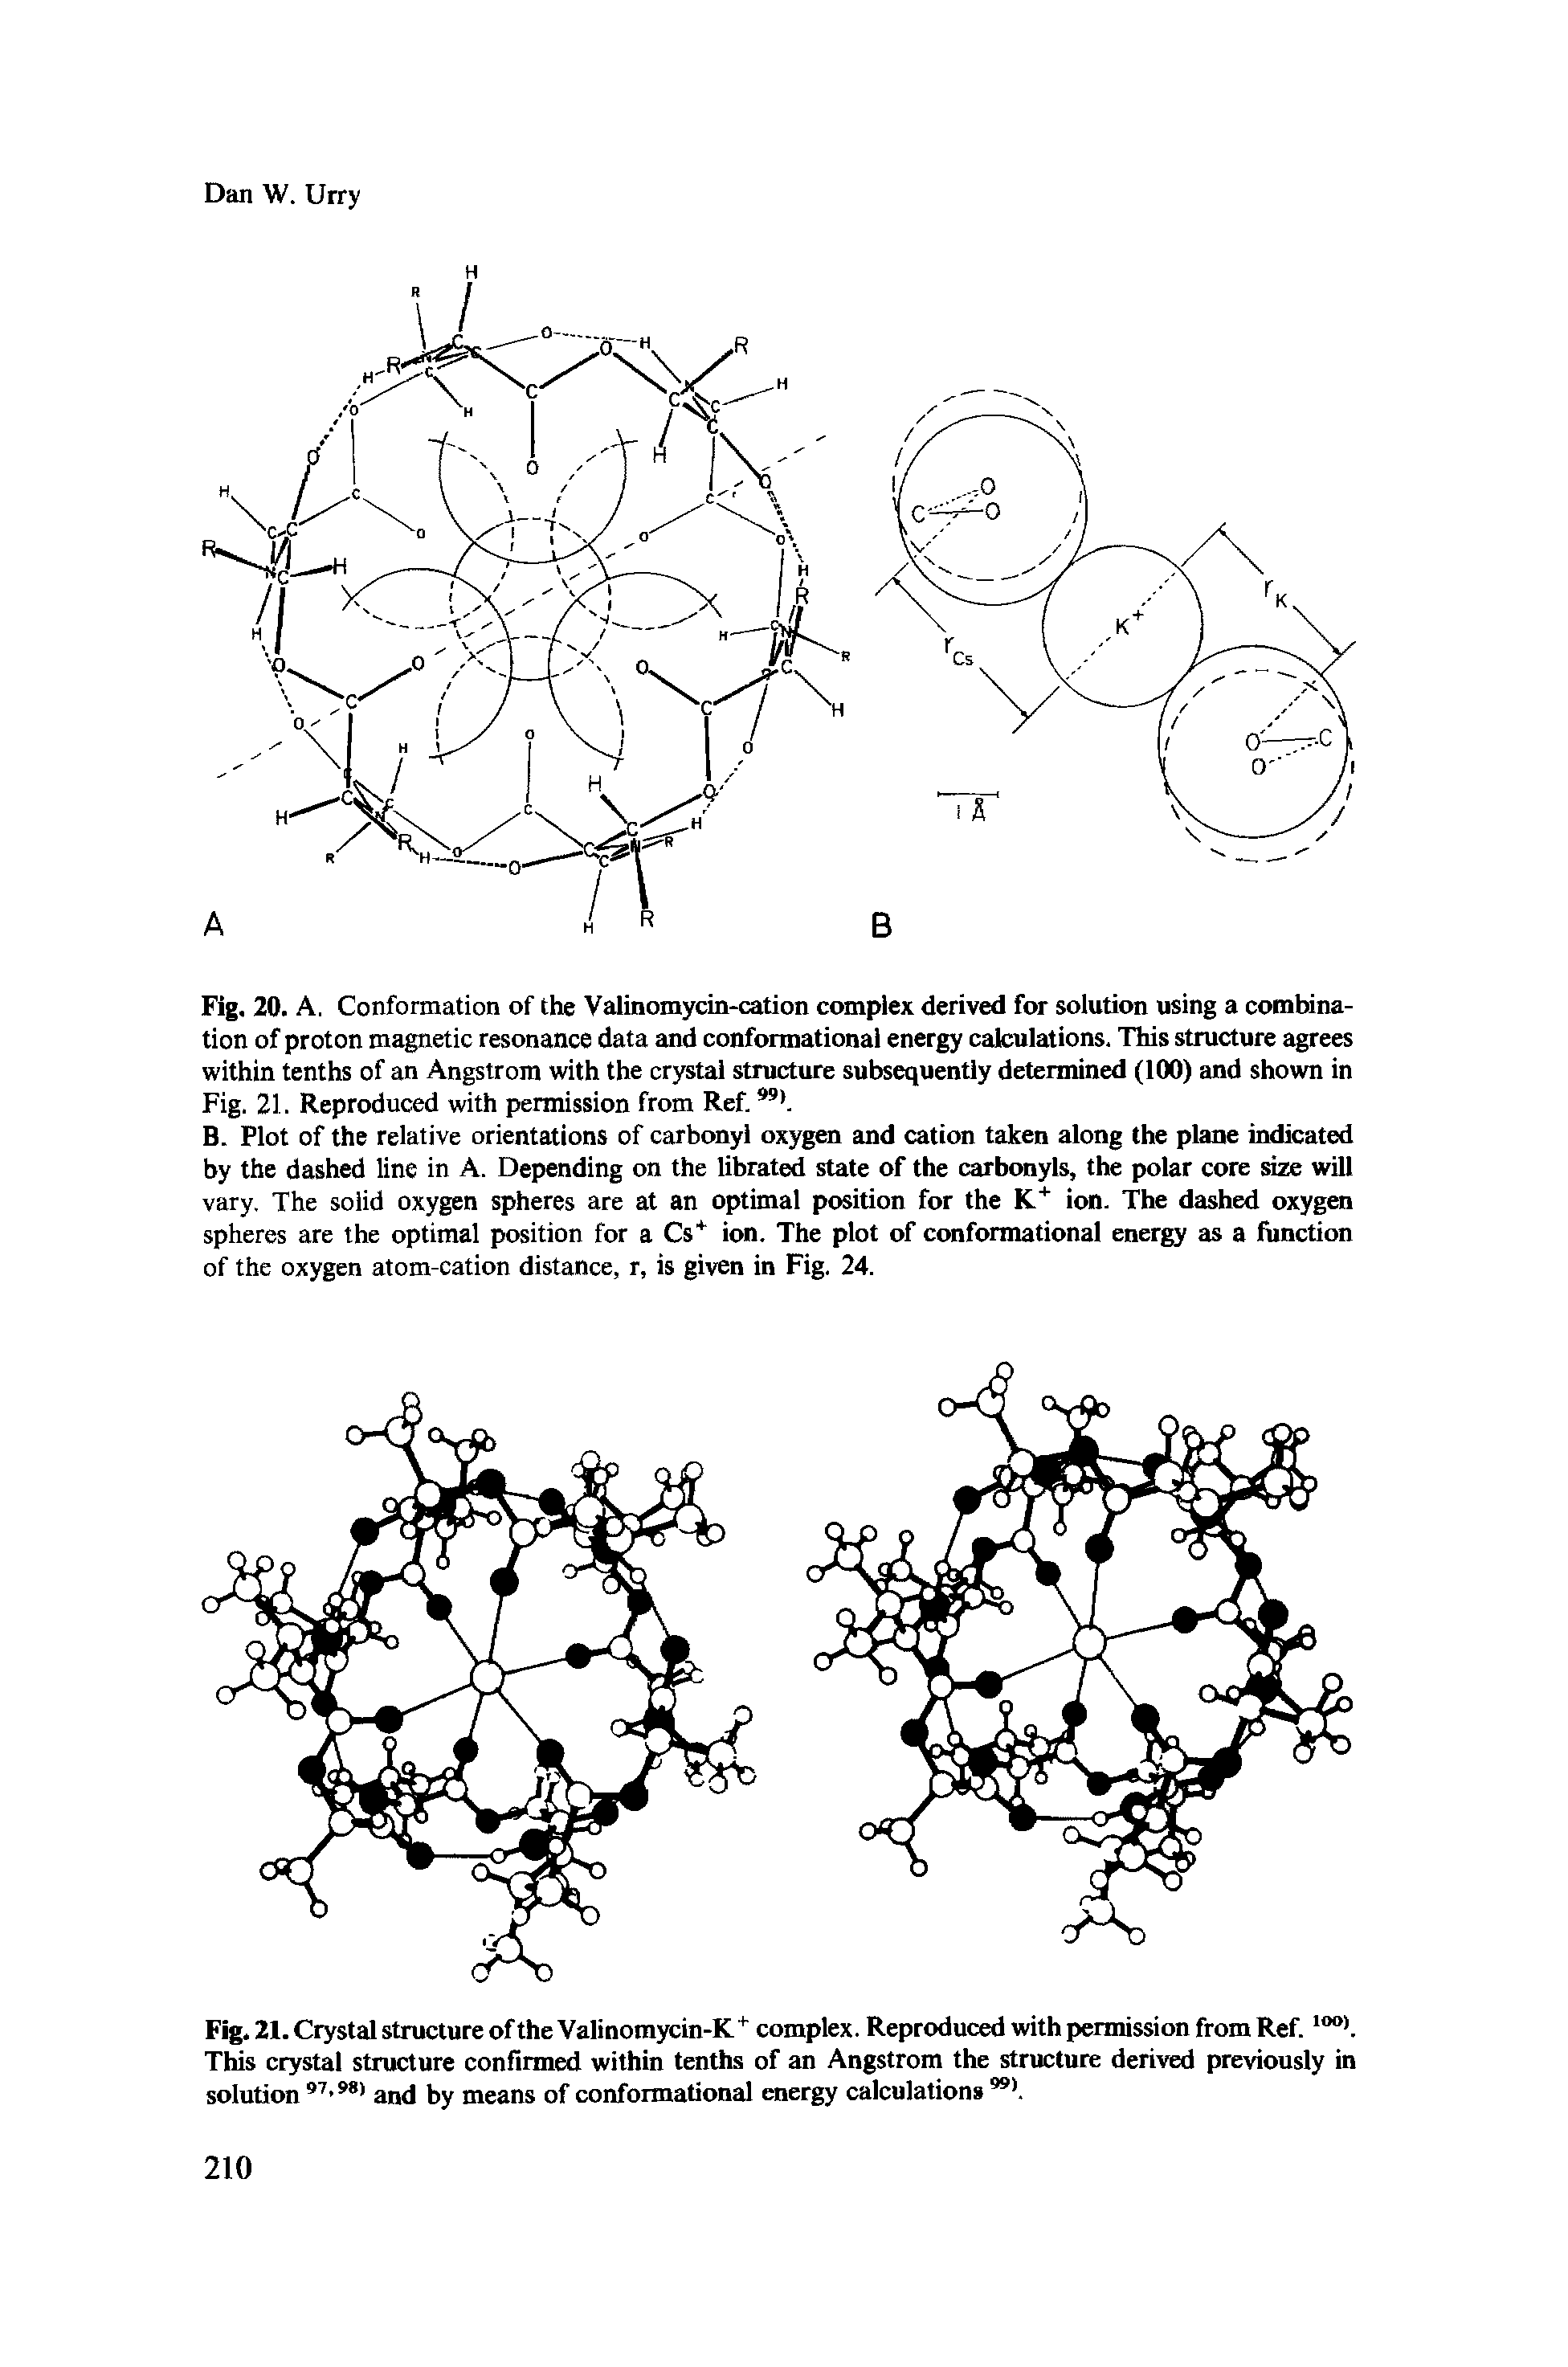 Fig. 21. Crystal structure of the Valinomycin-K+ complex. Reproduced with permission from Ref.100). This crystal structure confirmed within tenths of an Angstrom the structure derived previously in solution 97 98) and by means of conformational energy calculations...